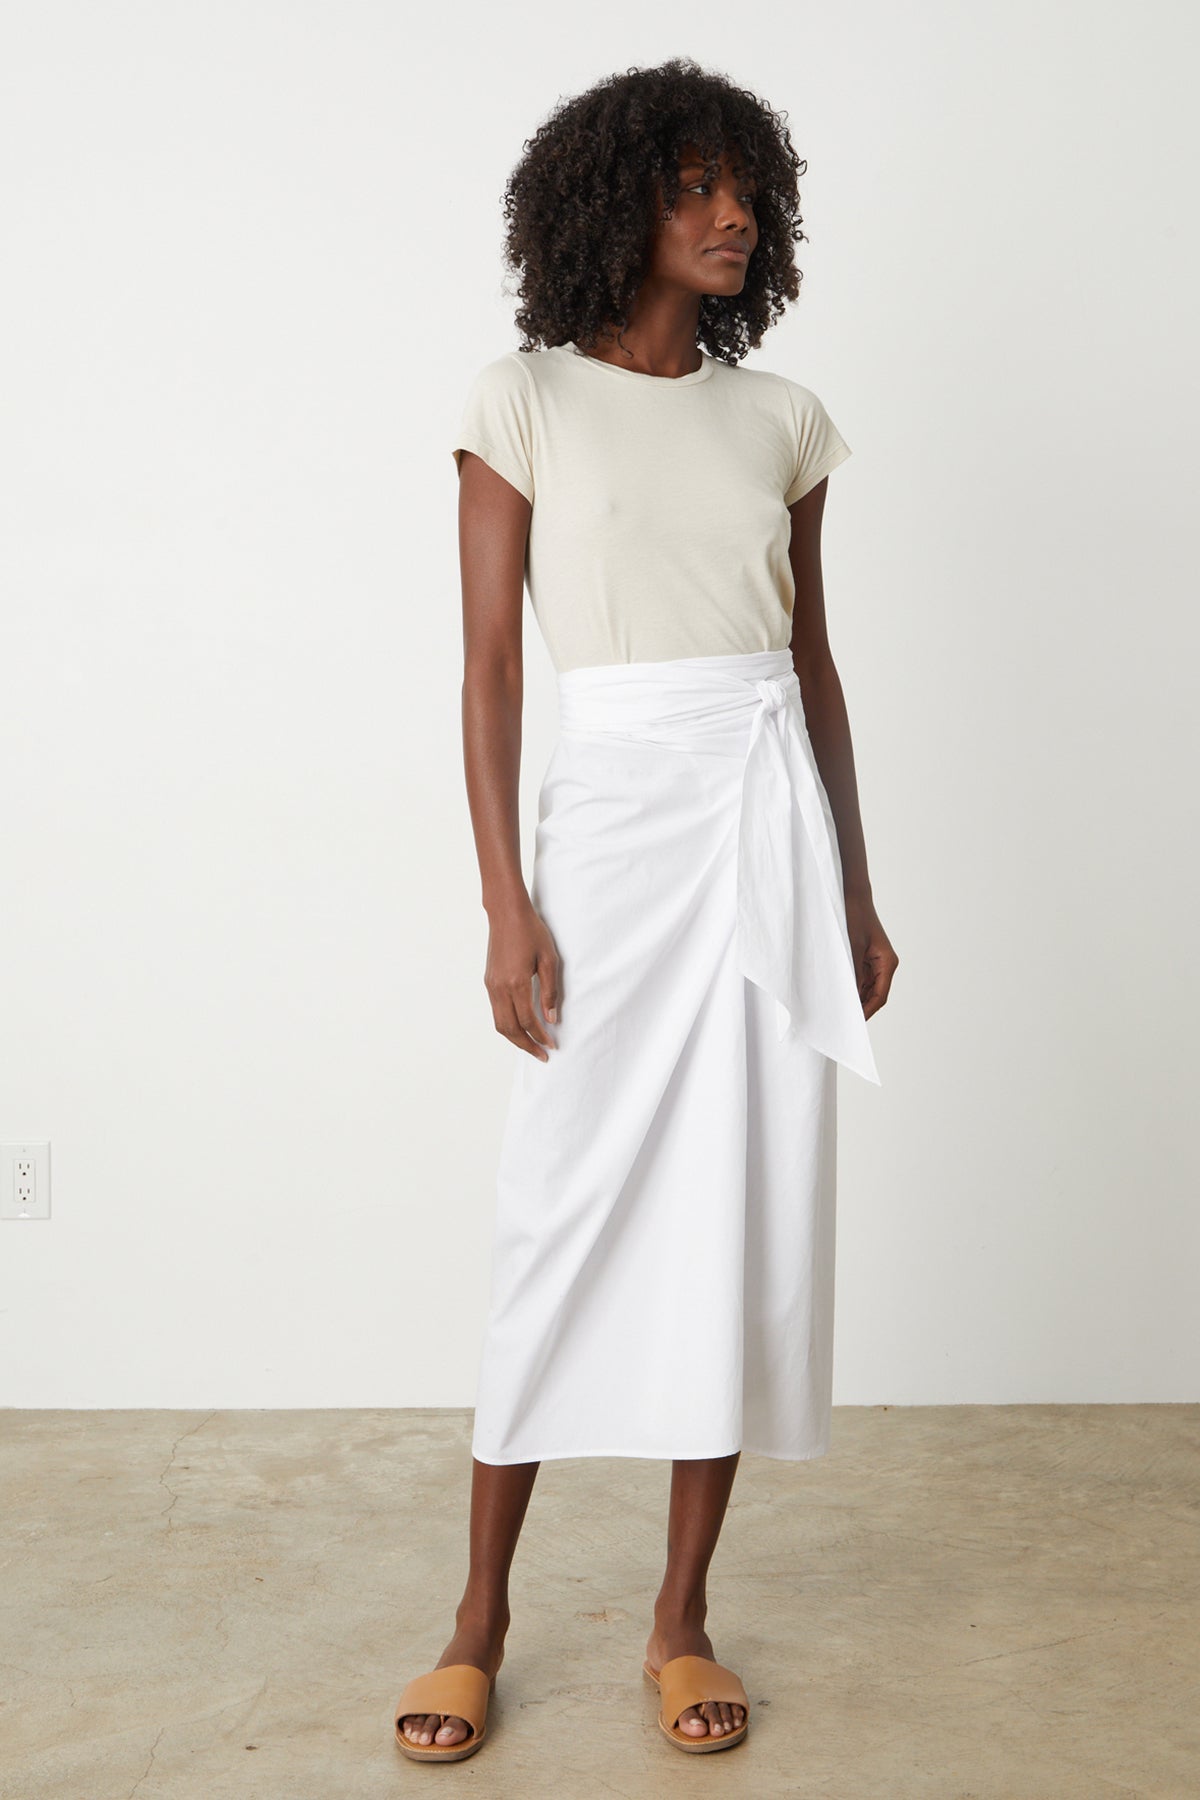 Leena Skirt with tie in front white with Nina Tee in bisque tucked, full length front with slides-26479442428097